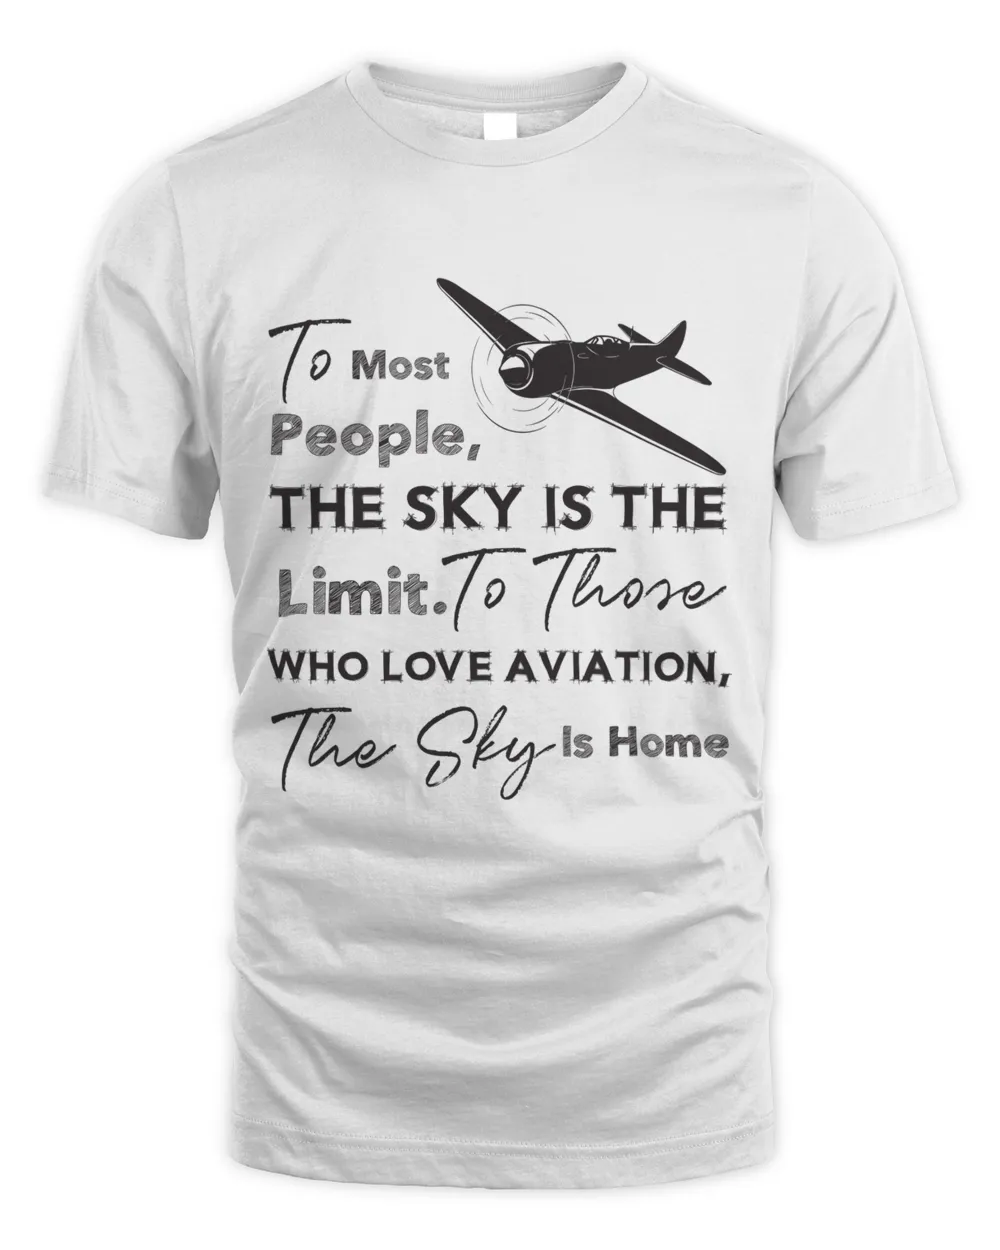 To most people, the sky is the limit. To those who love aviation, the sky is home